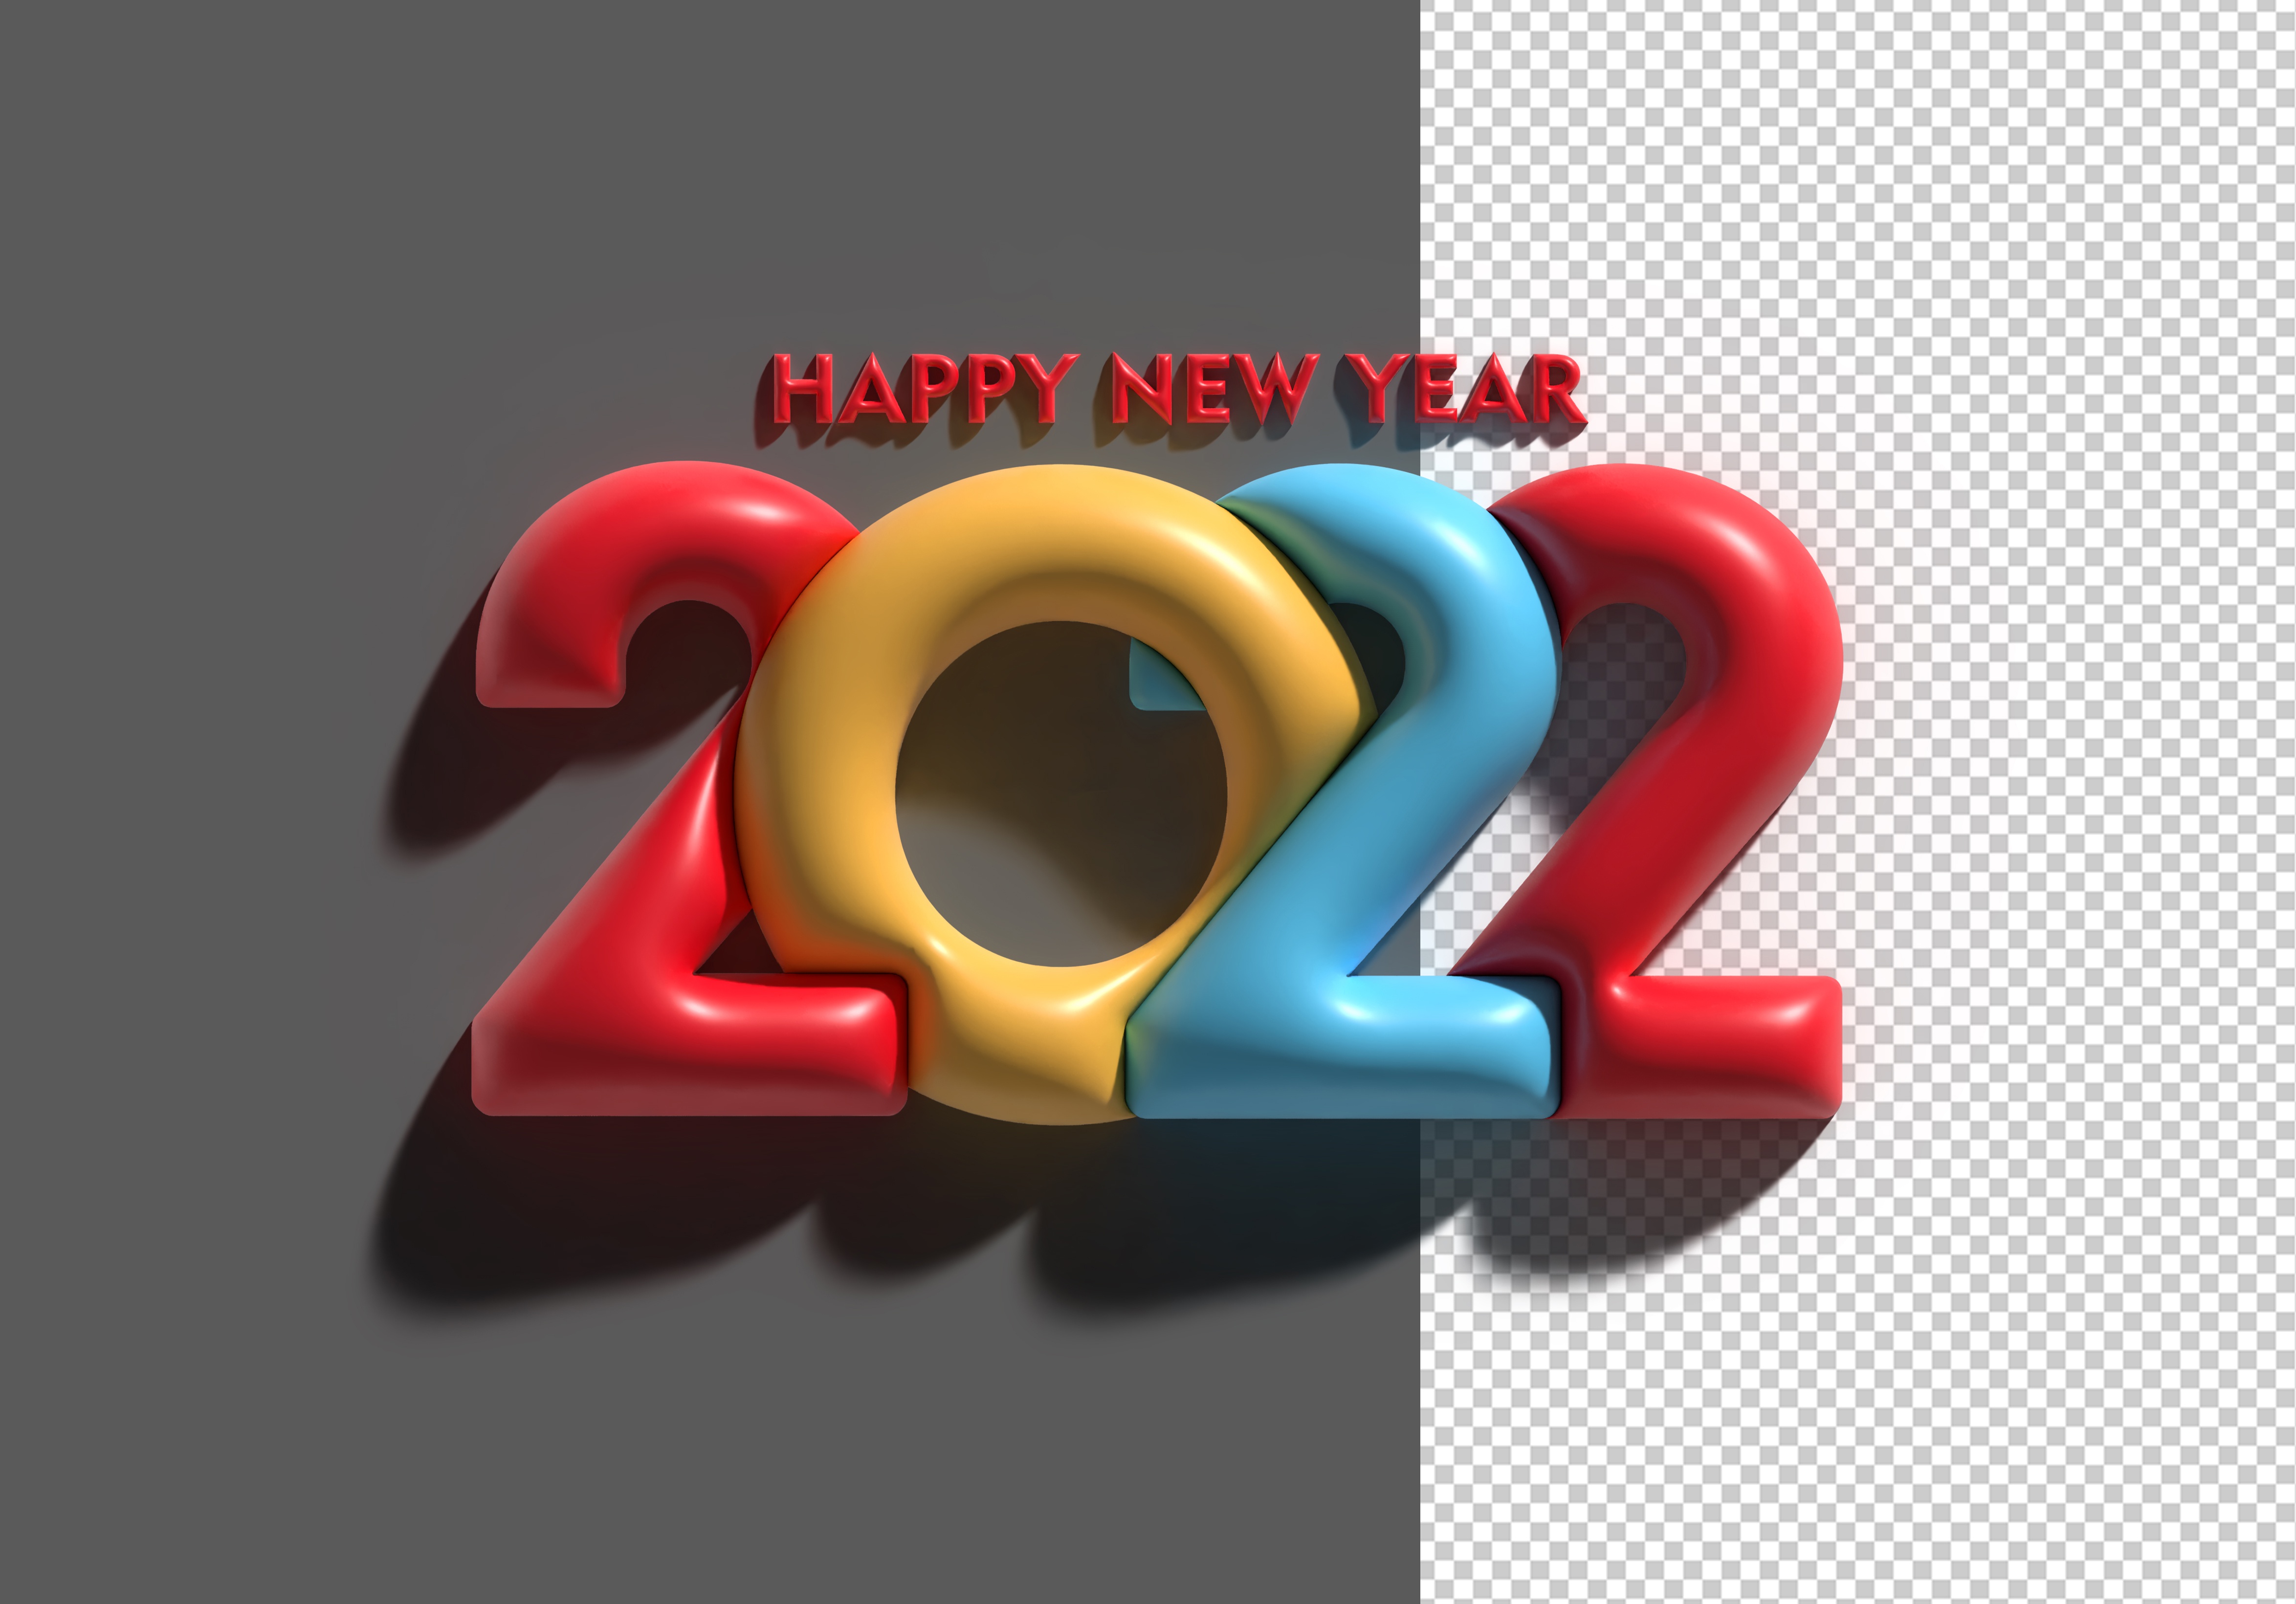  New Year 2022 Cellphone FHD pic